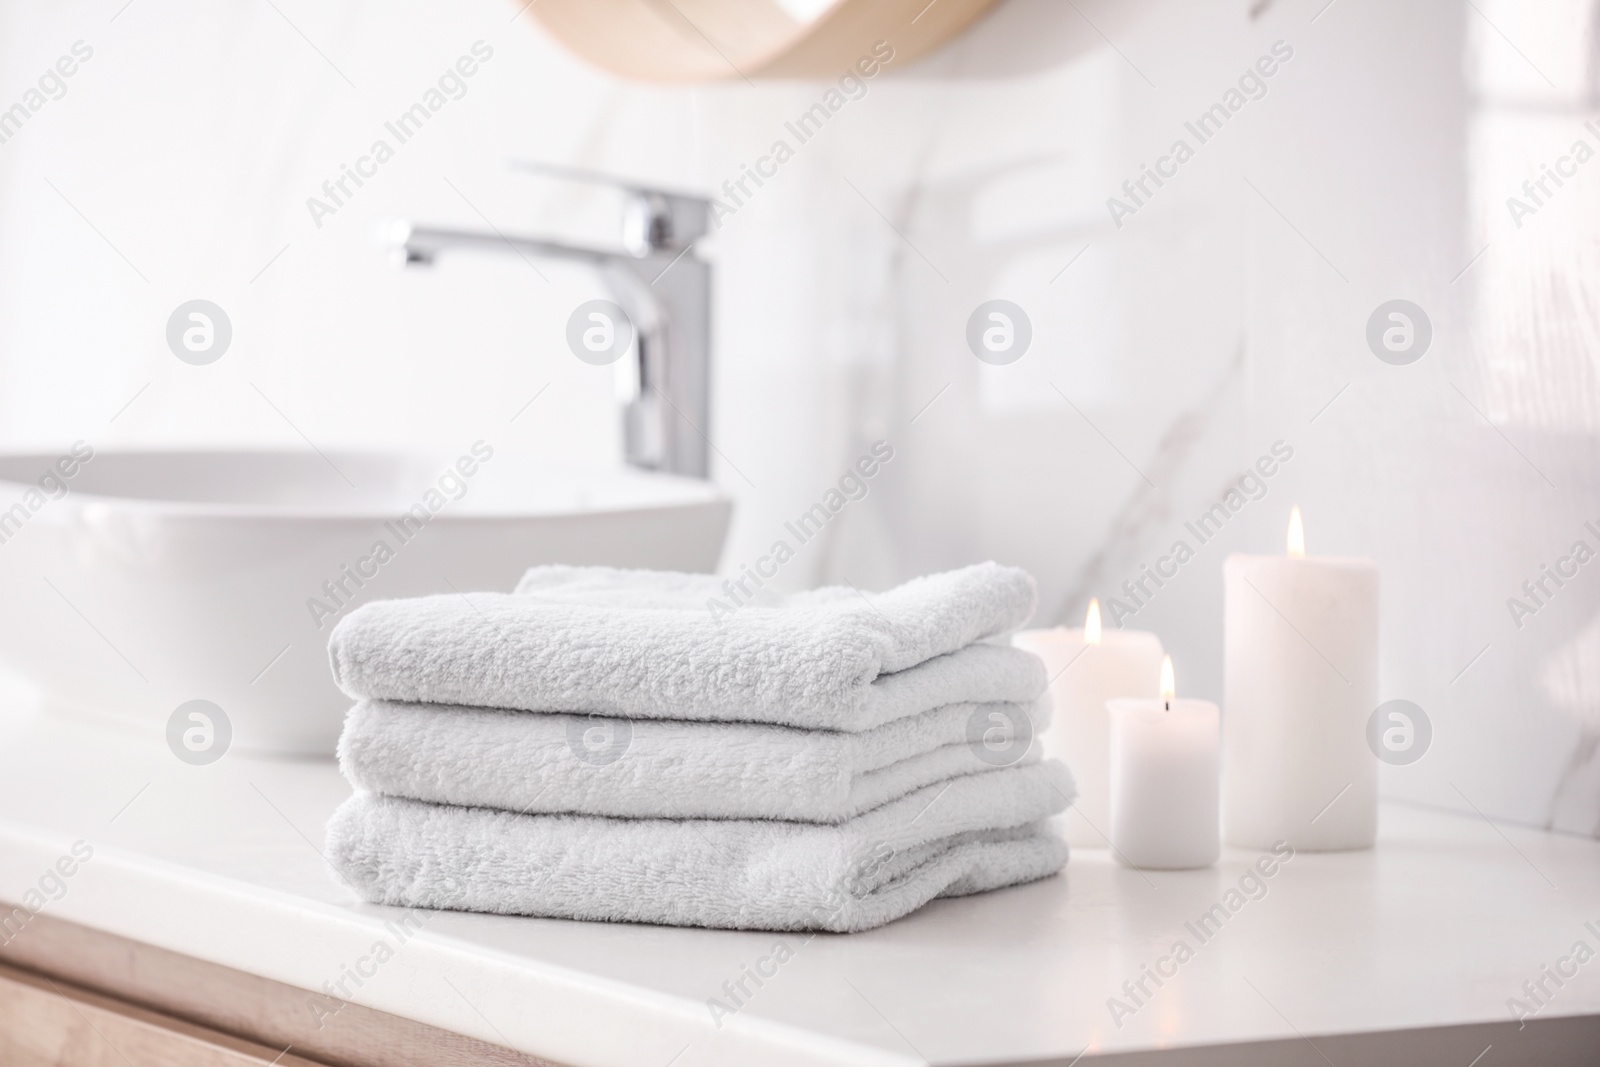 Photo of Stack of fresh towels and burning candles on countertop in bathroom